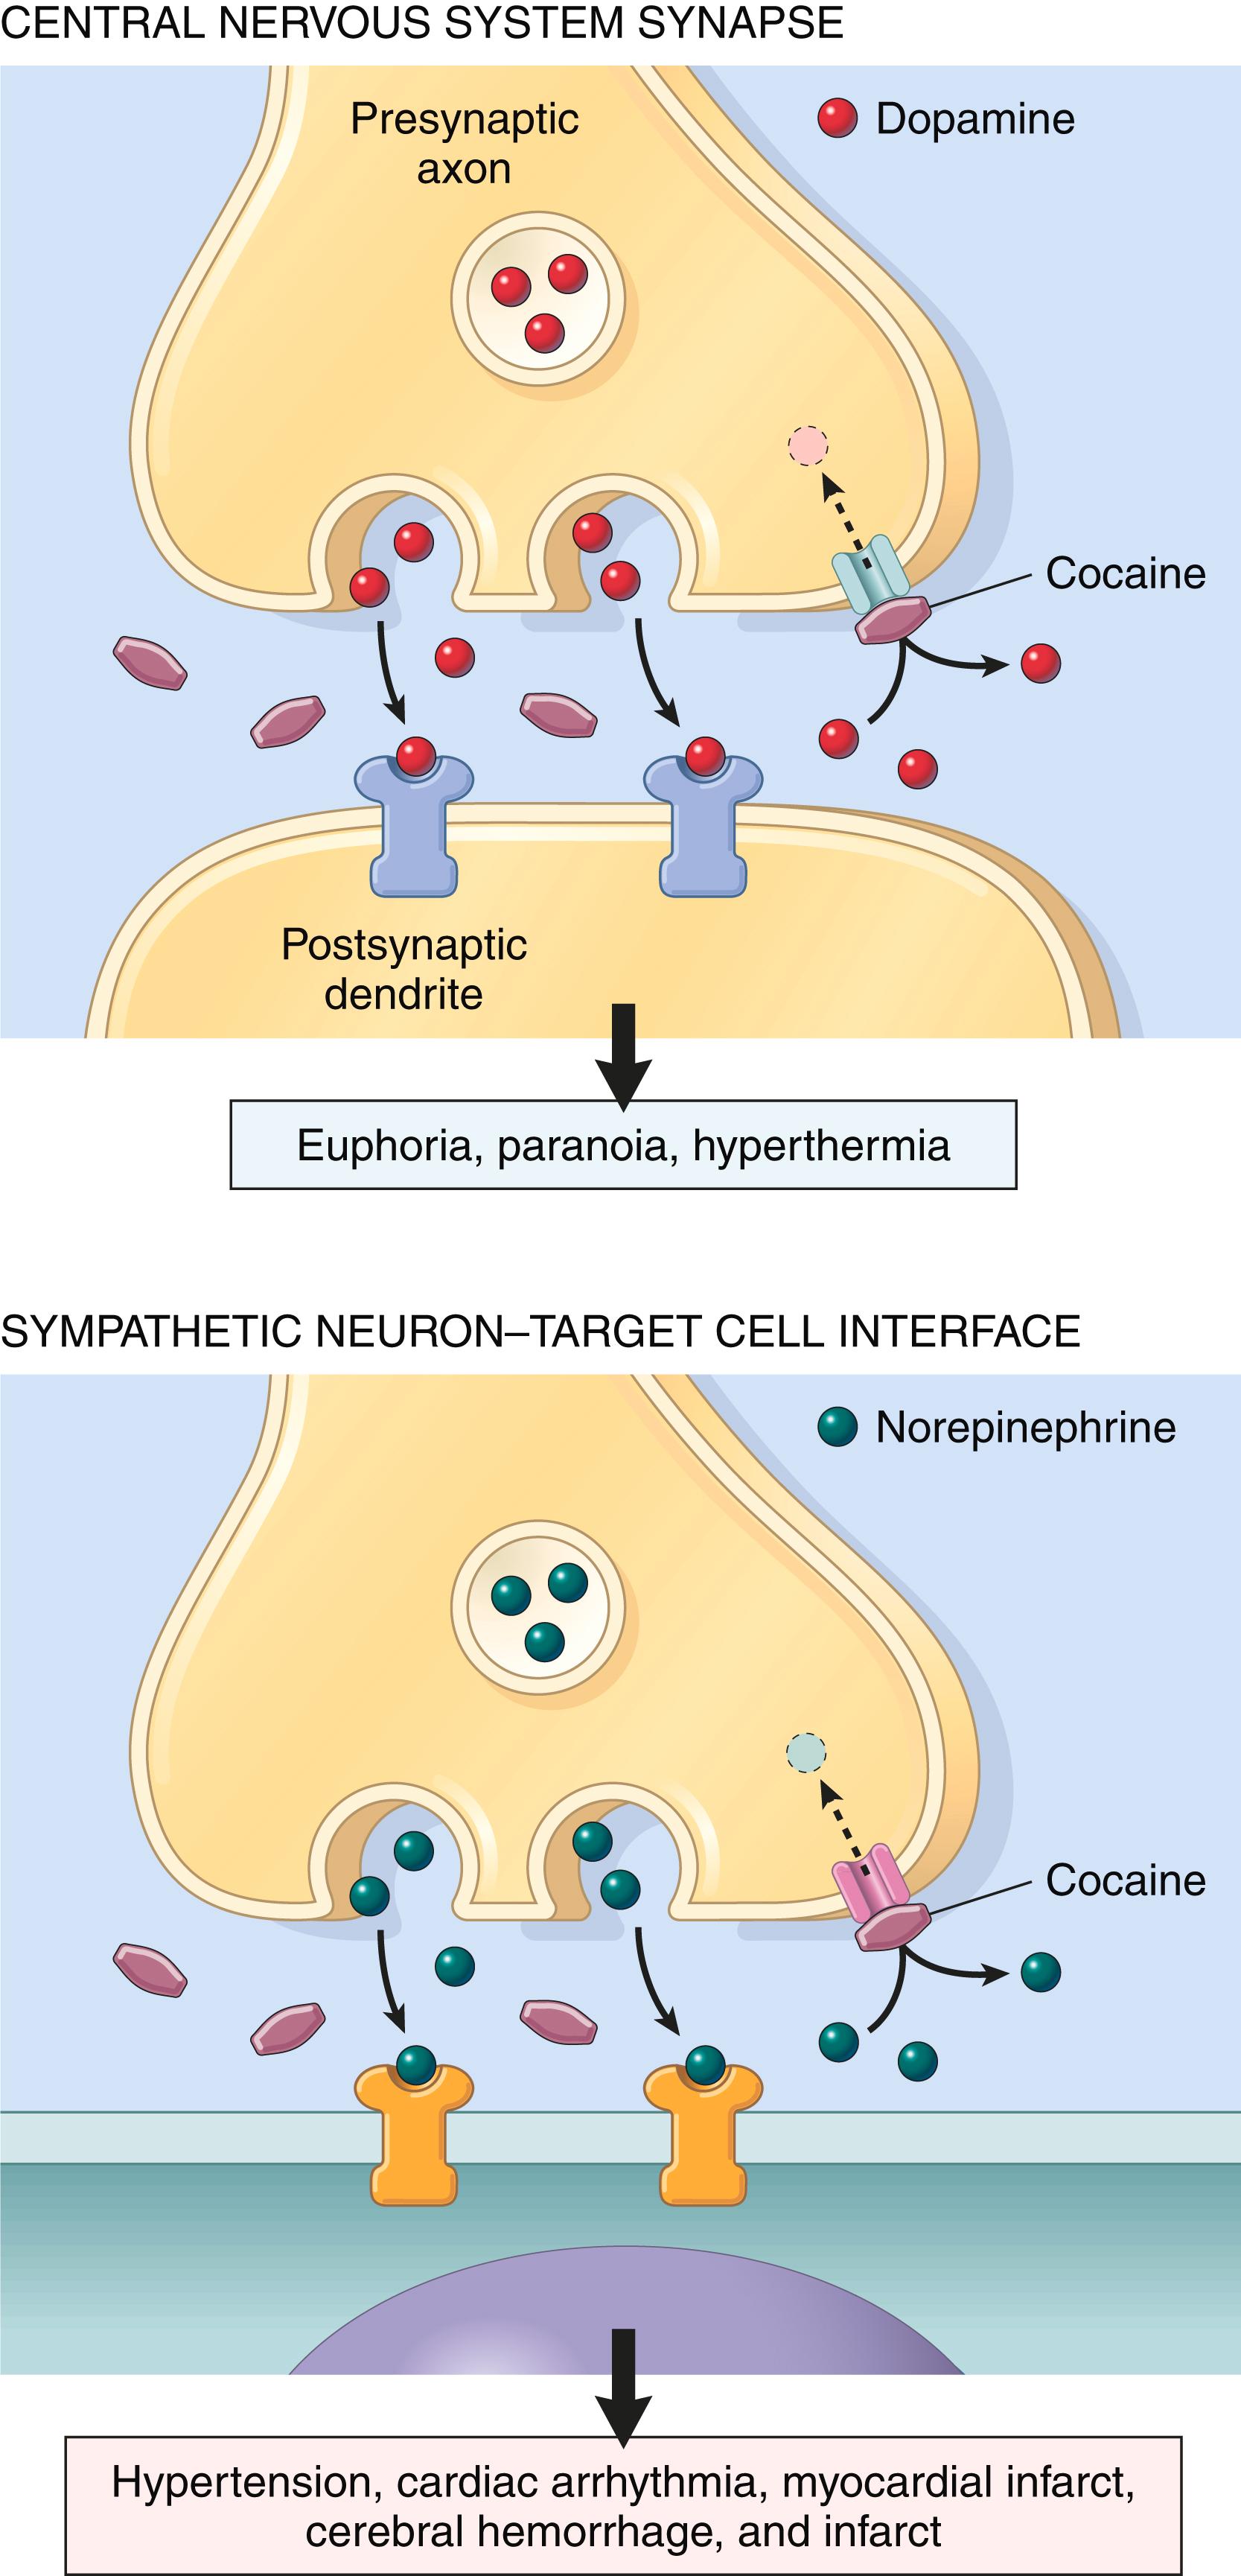 FIG. 7.13, The effect of cocaine on neurotransmission. The drug inhibits reuptake of the neurotransmitters dopamine and norepinephrine in the central and peripheral nervous systems.